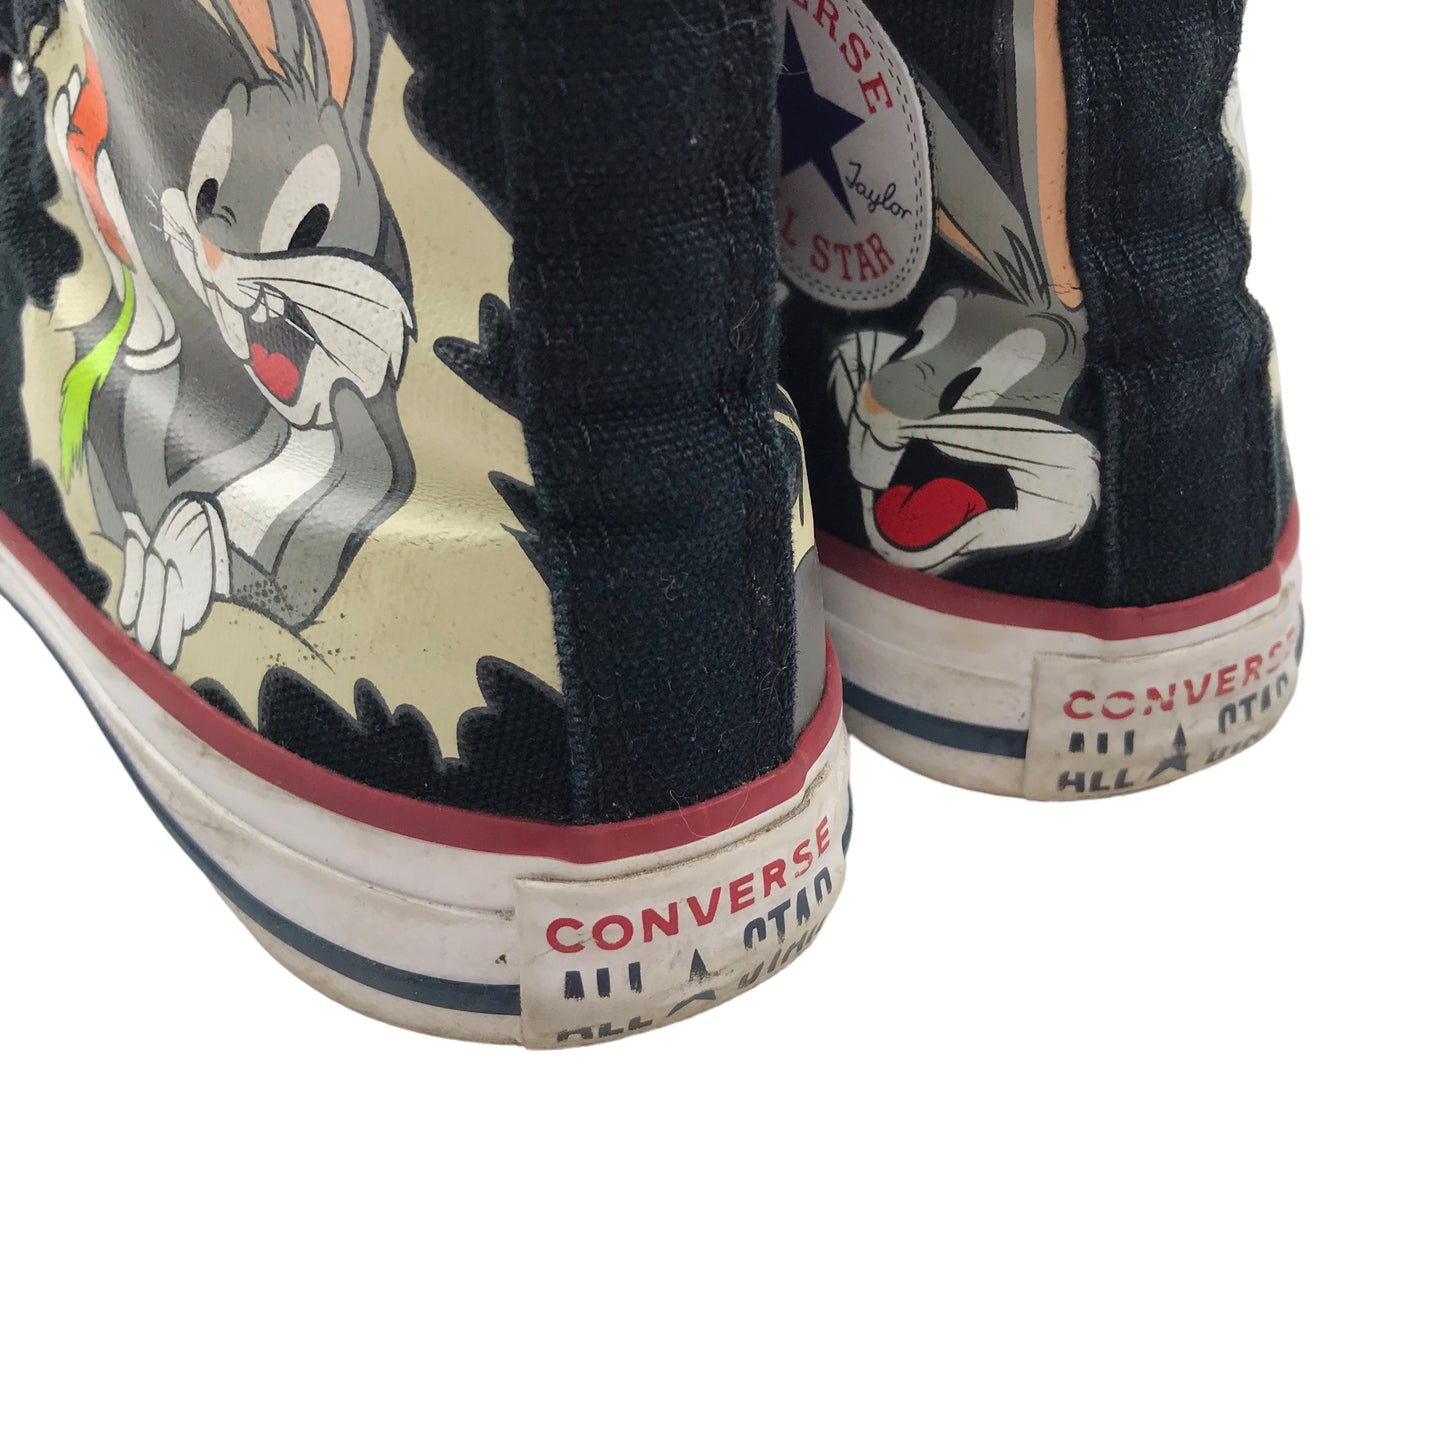 Converse All Star Bugs Bunny High Tops Trainers Shoe Size 13 junior